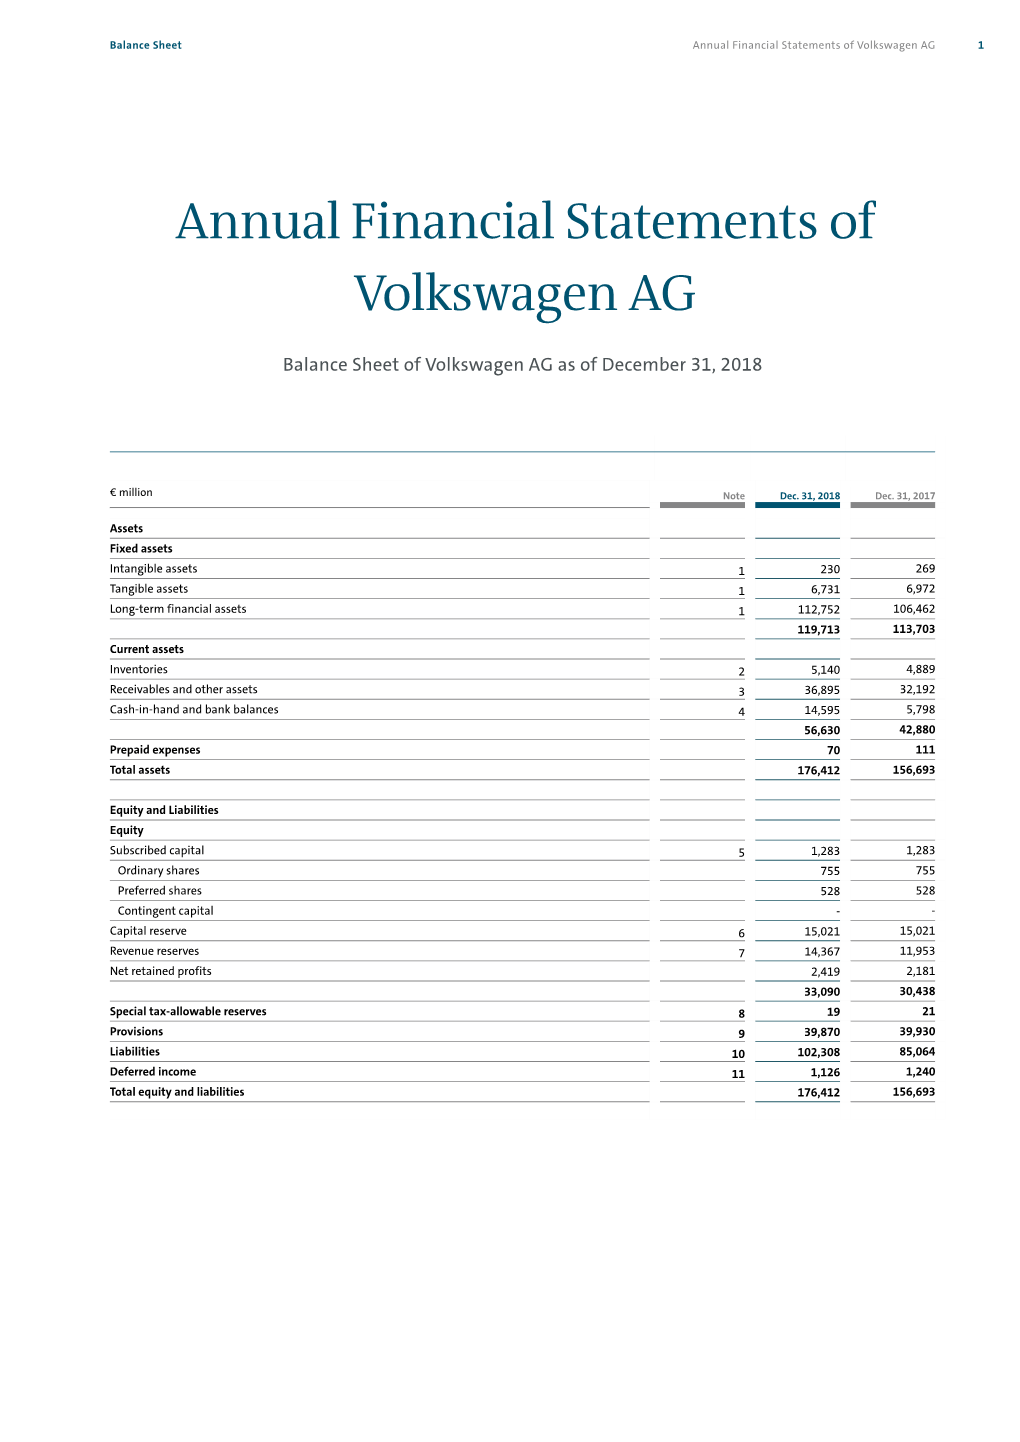 Annual Financial Statements of Volkswagen AG 1